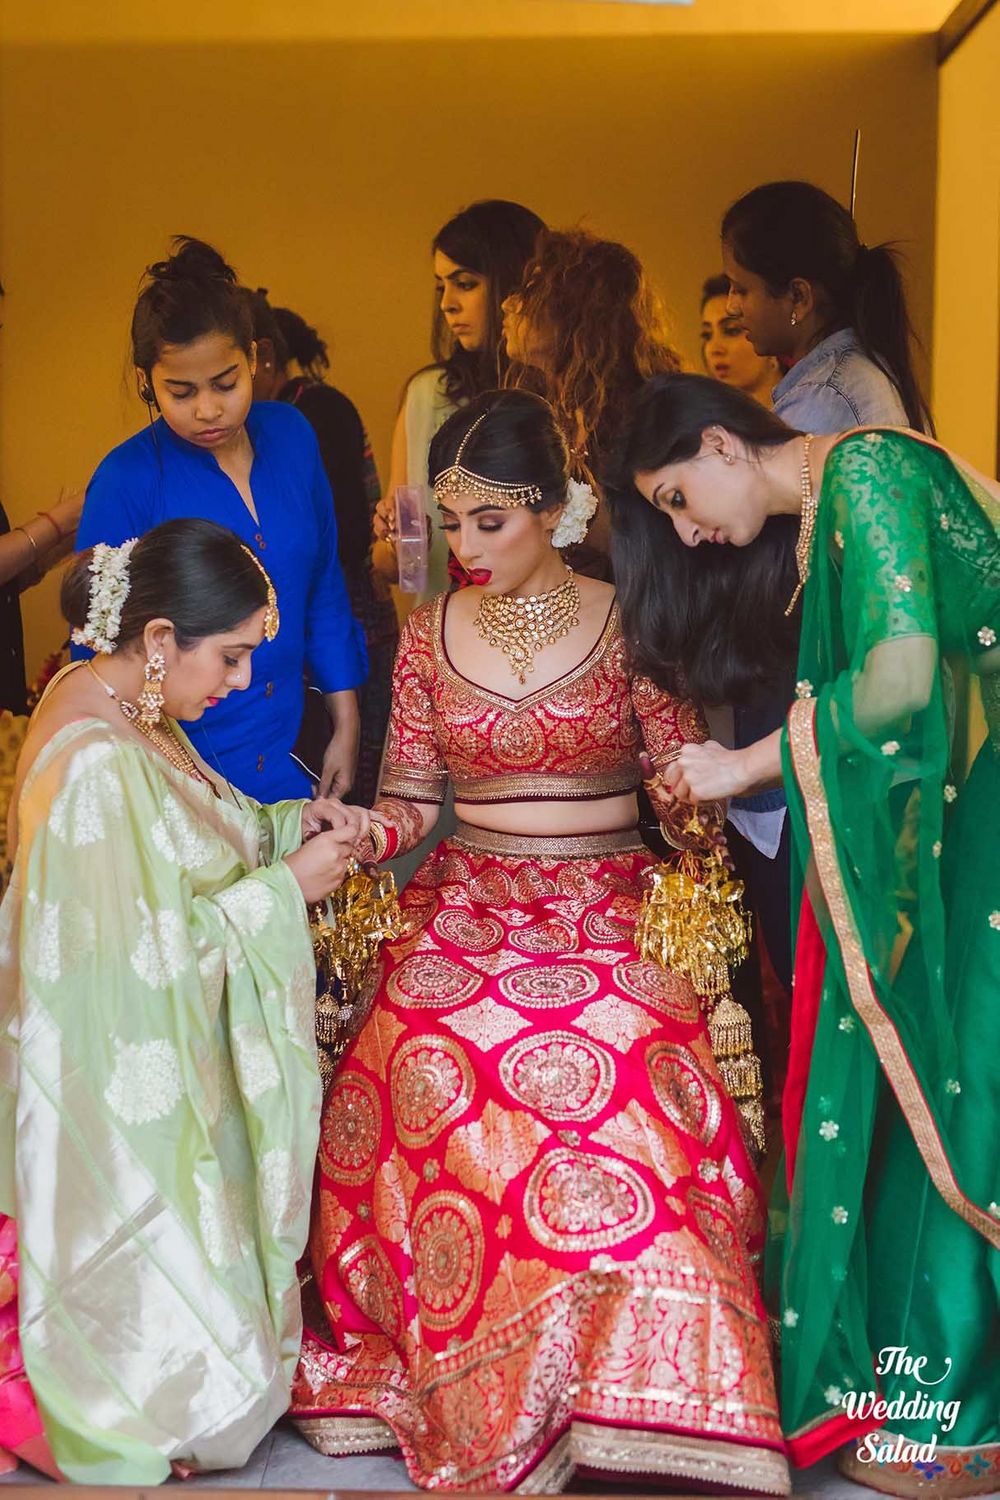 Photo of Bride with bridesmaids helping her get ready shot